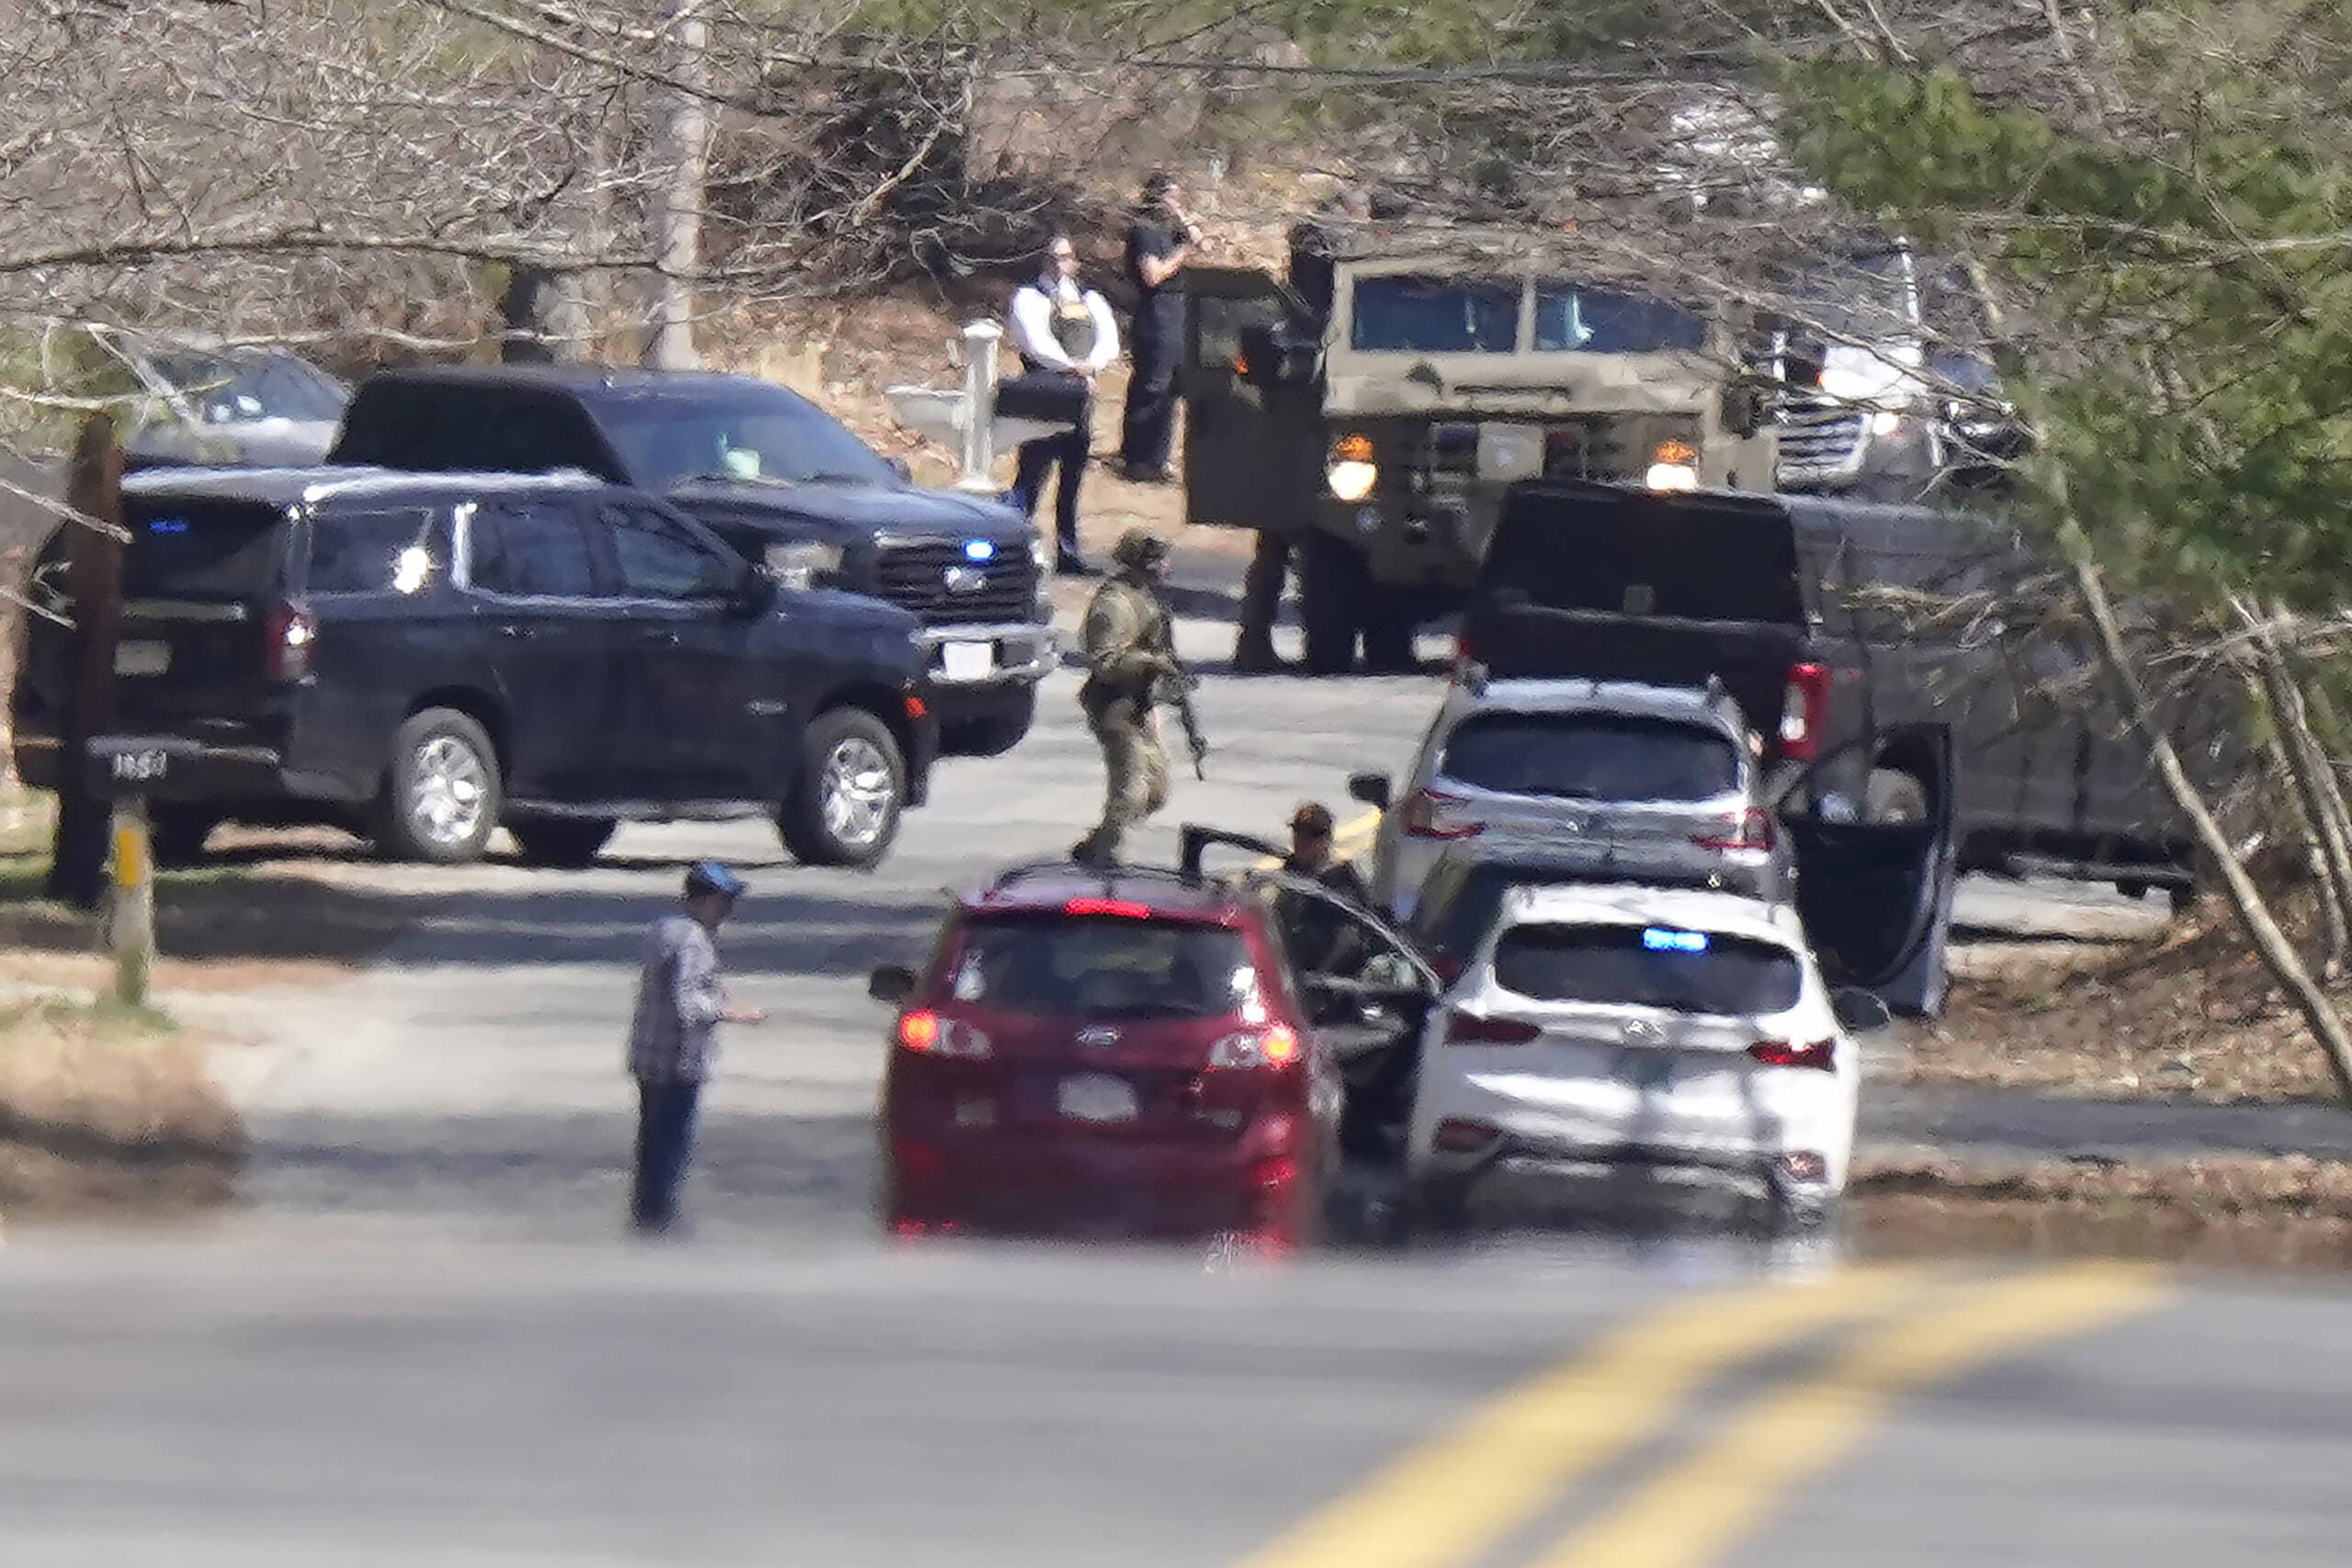 Members of law enforcement assemble on a road, Thursday, April 13, 2023, in Dighton, where FBI agents converged on the home of a Massachusetts Air National Guard member who has emerged as a main person of interest in the disclosure of highly classified military documents. (Steven Senne/AP)